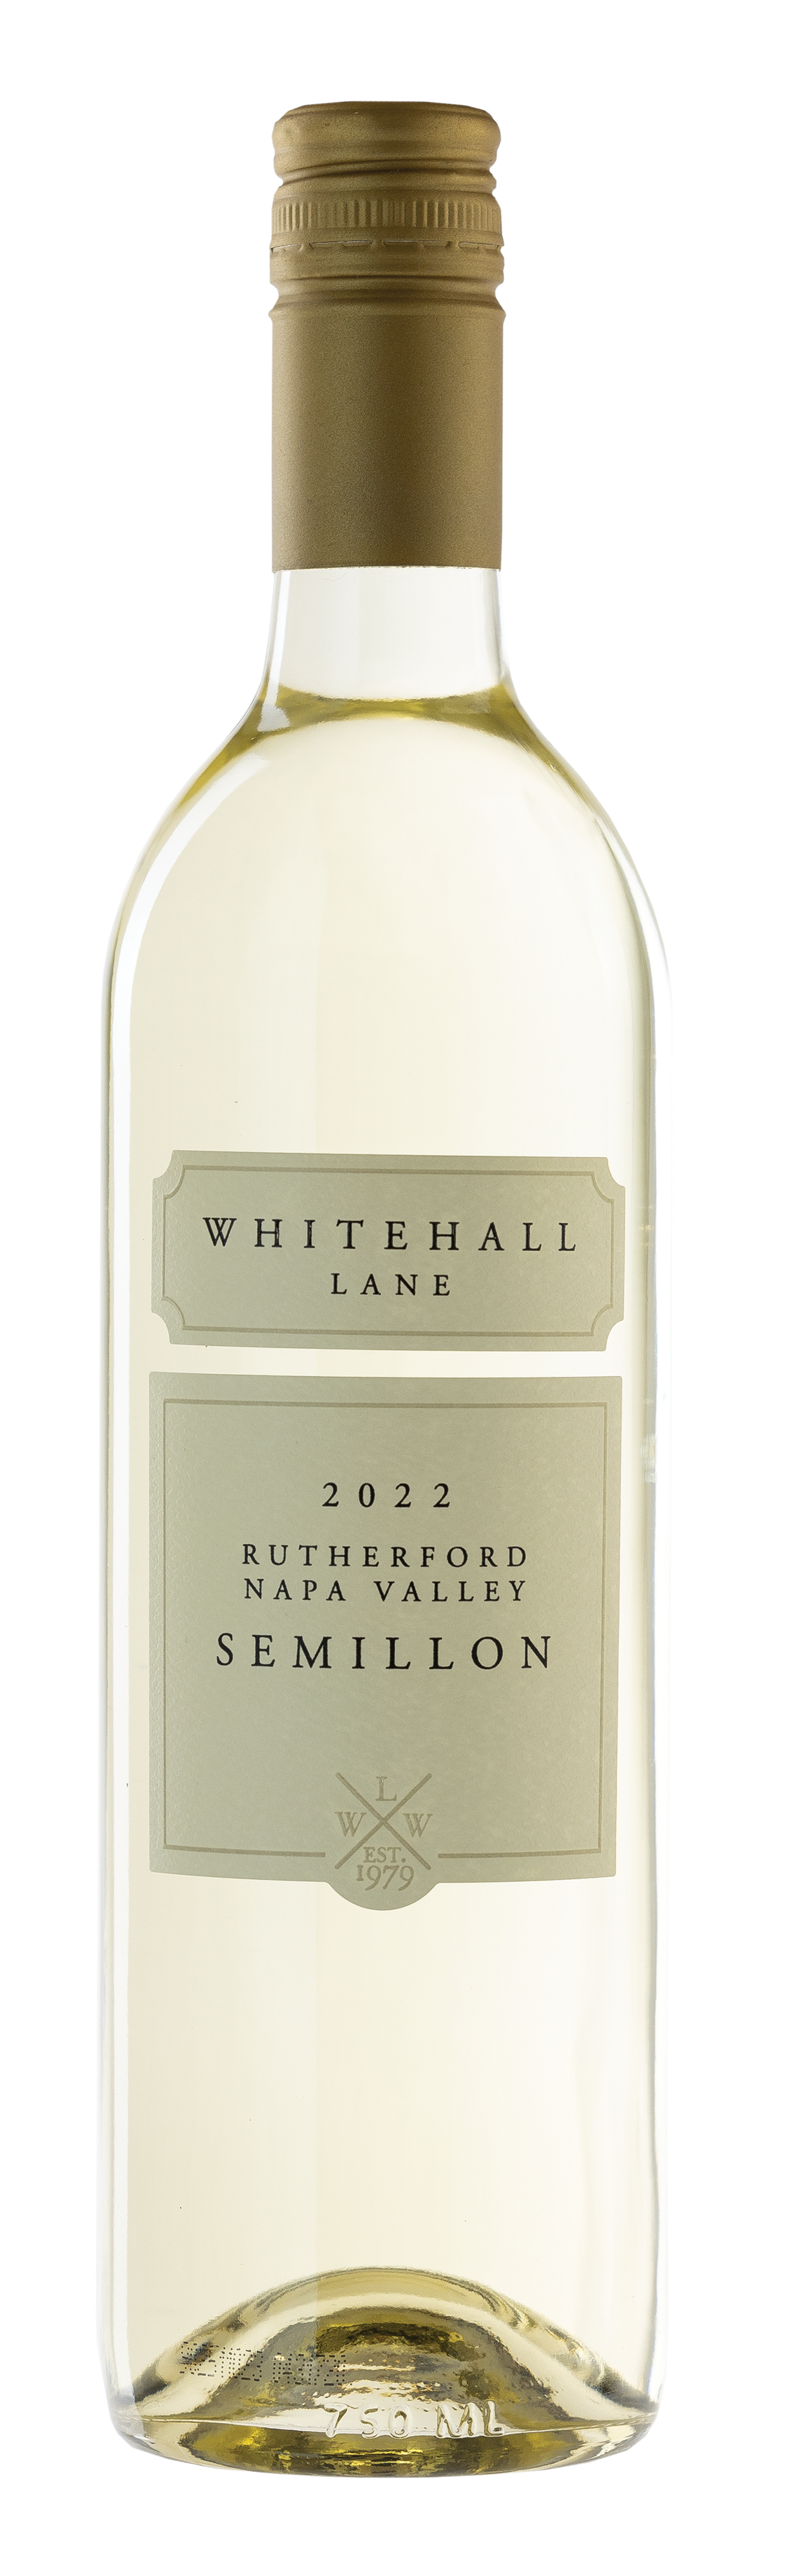 Product Image for 2022 Semillon, Napa Valley